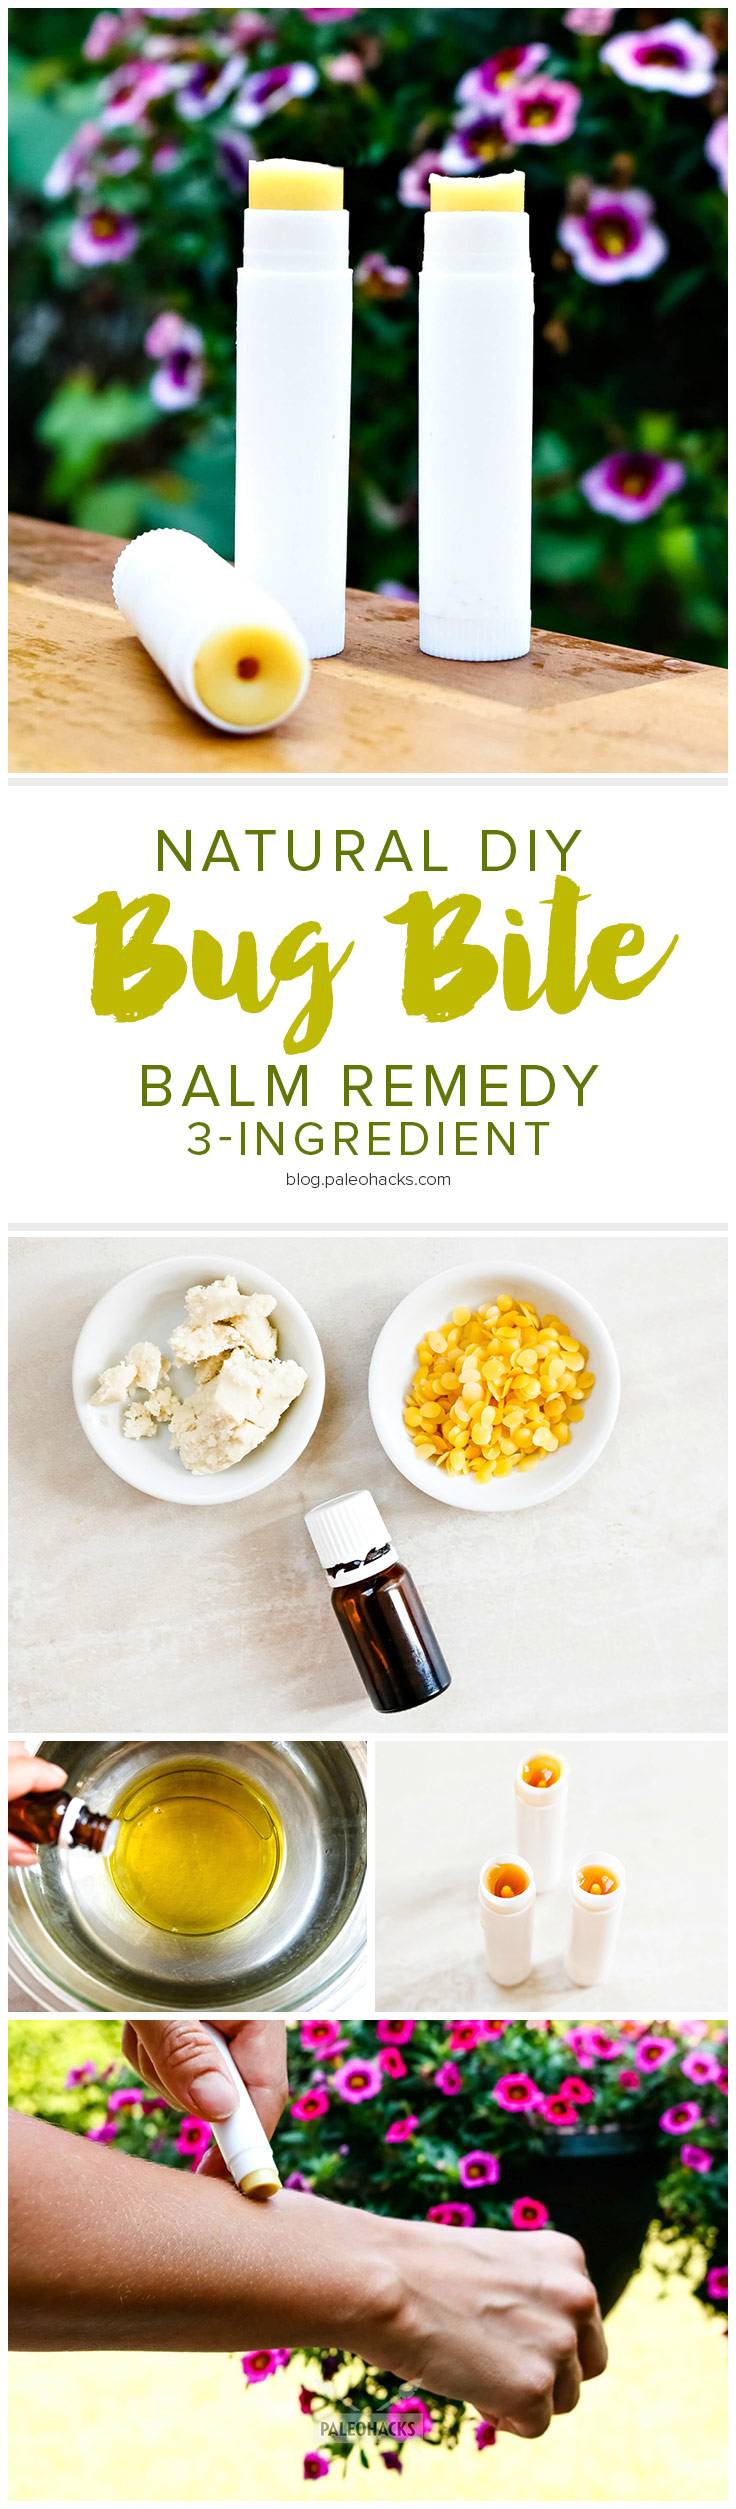 Use this handy Bug Bite Balm to naturally soothe and calm itchy insect bites. This gentle bug remedy is toxic-free and travel-friendly for easy application.